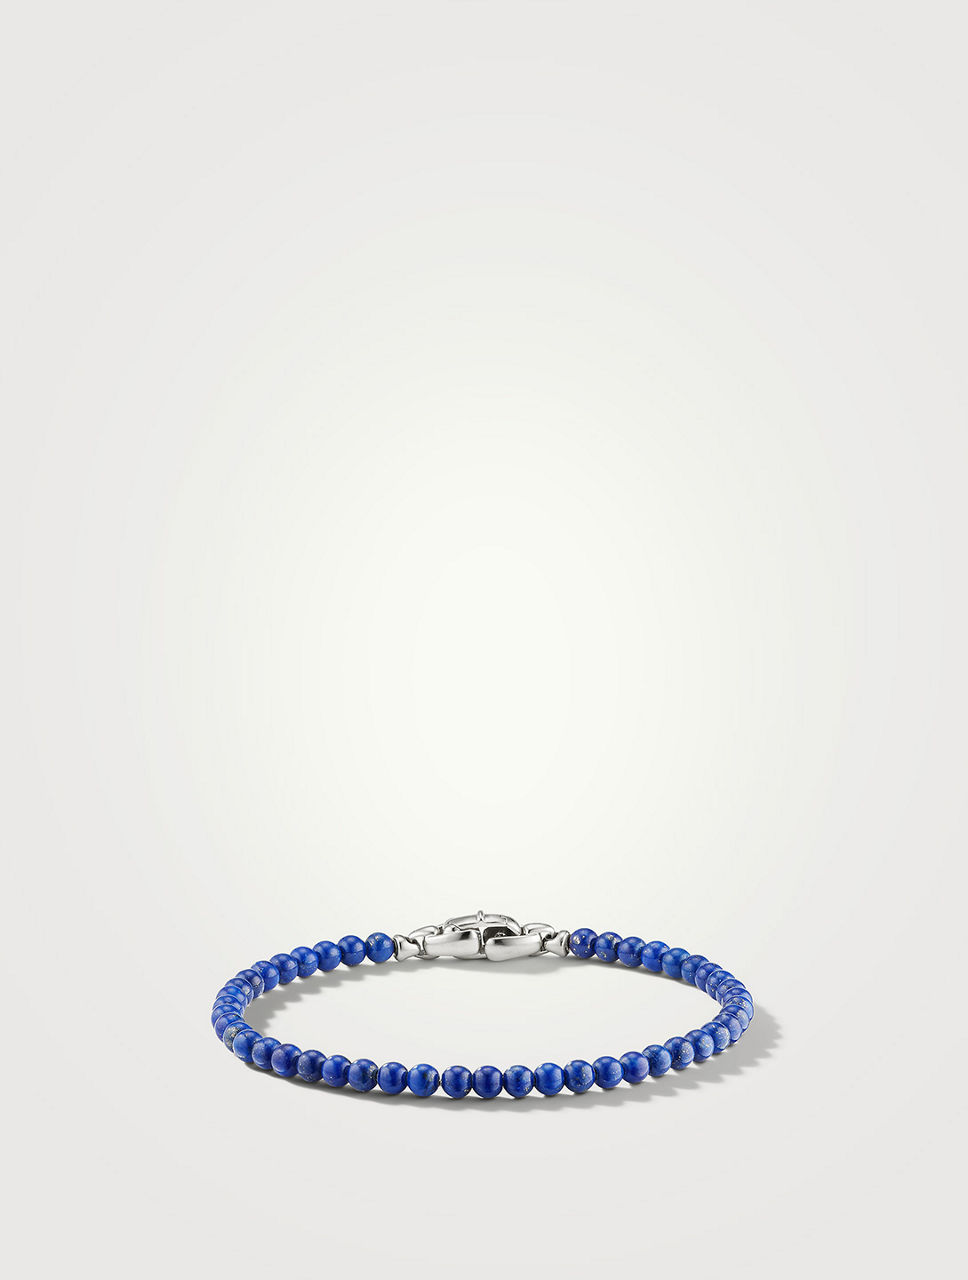 Spiritual Beads Bracelet Sterling Silver With Lapis